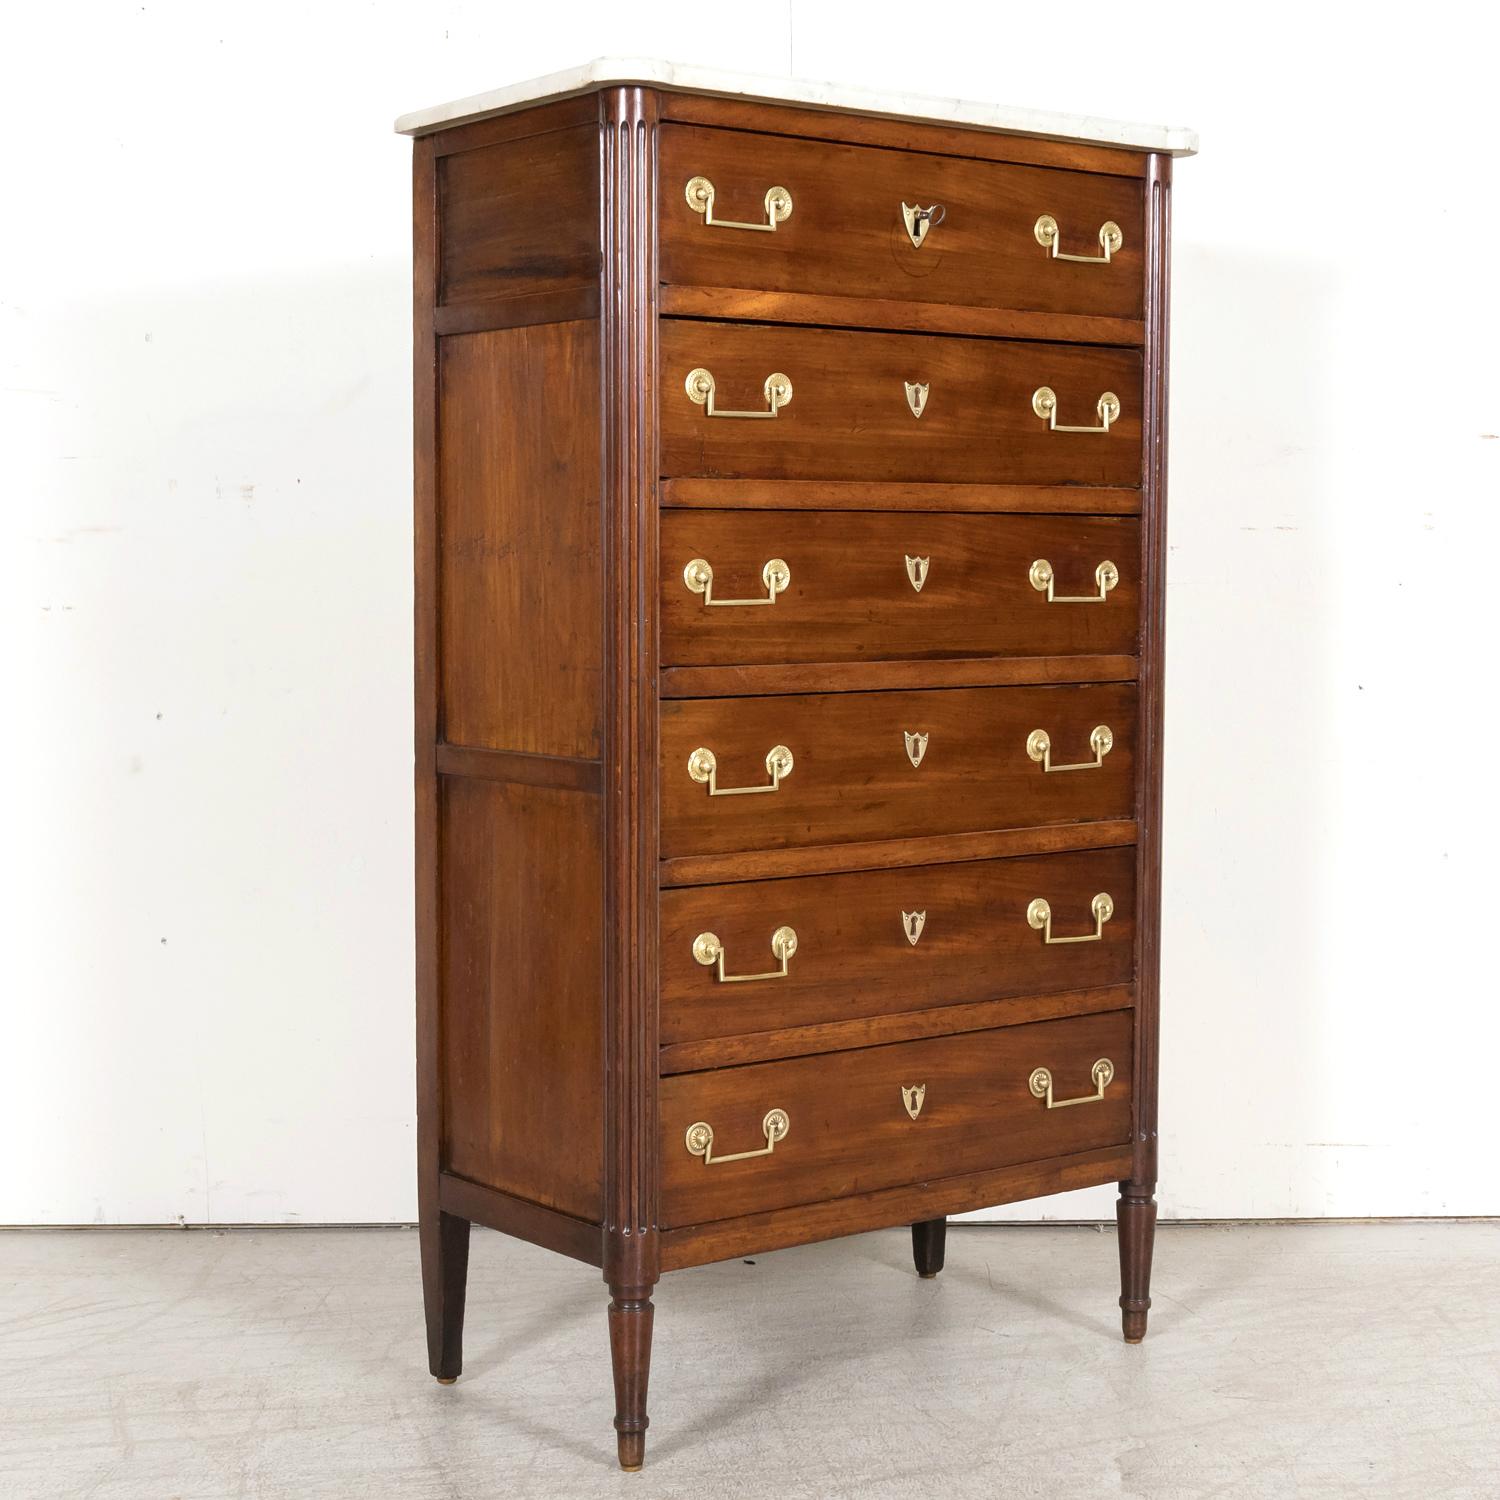 Early 19th Century 19th Century French Louis XVI Style Tall Mahogany Gentleman's Chest of Drawers